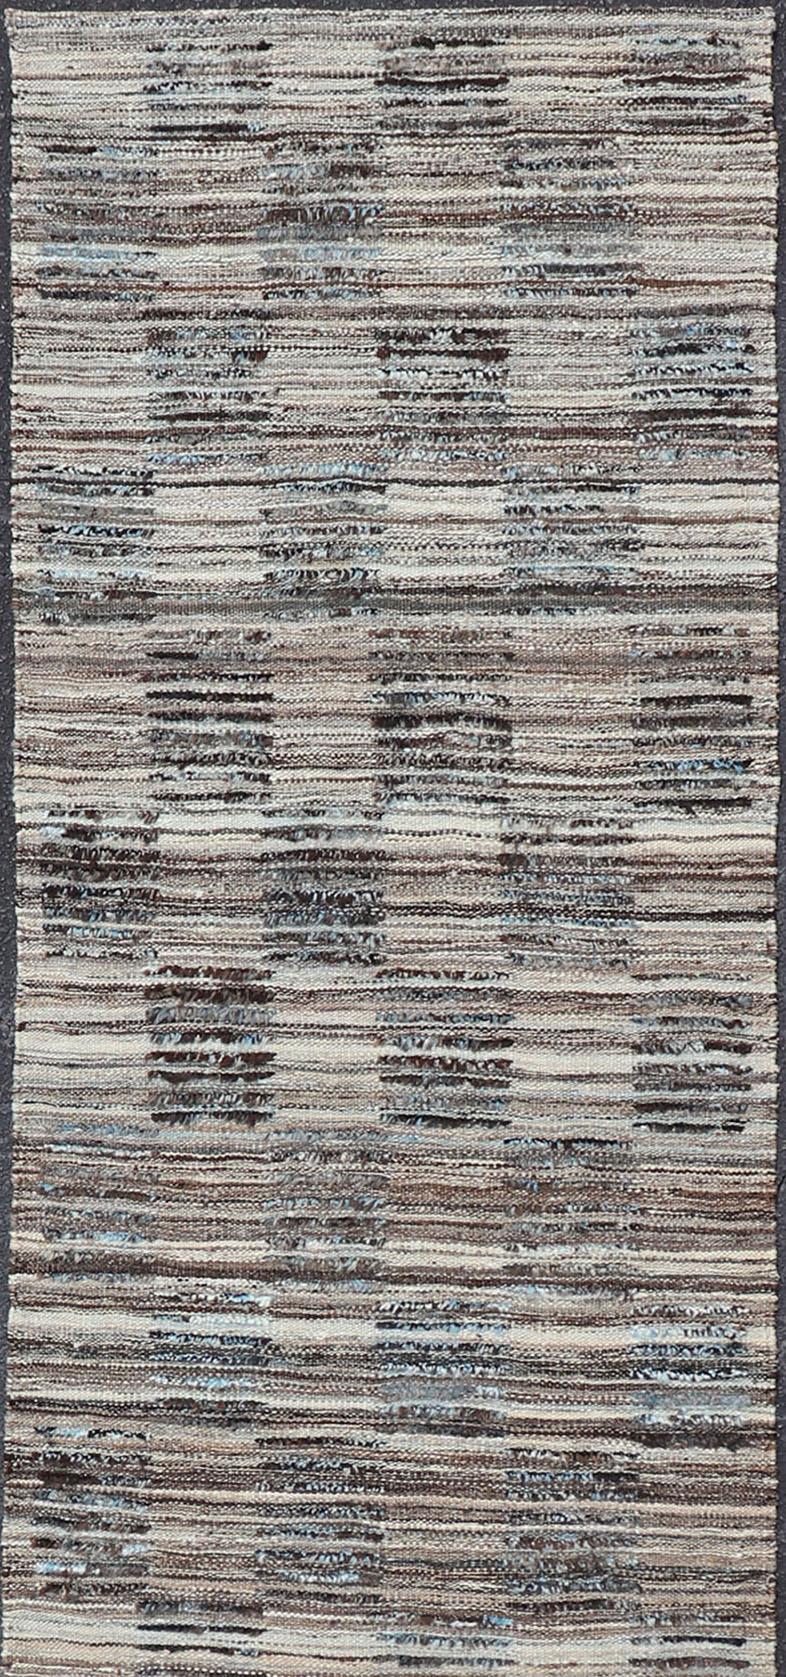 Hi Low pile rug, combination of Kilim and pile Rug with Checkerboard design in gray, charcoal, and blue,
Shades of blue Modern Rug with Kilim-Piled Texture, Keivan Woven Arts / rug AFG-30489, country of origin / type: Afghanistan / Kilim,